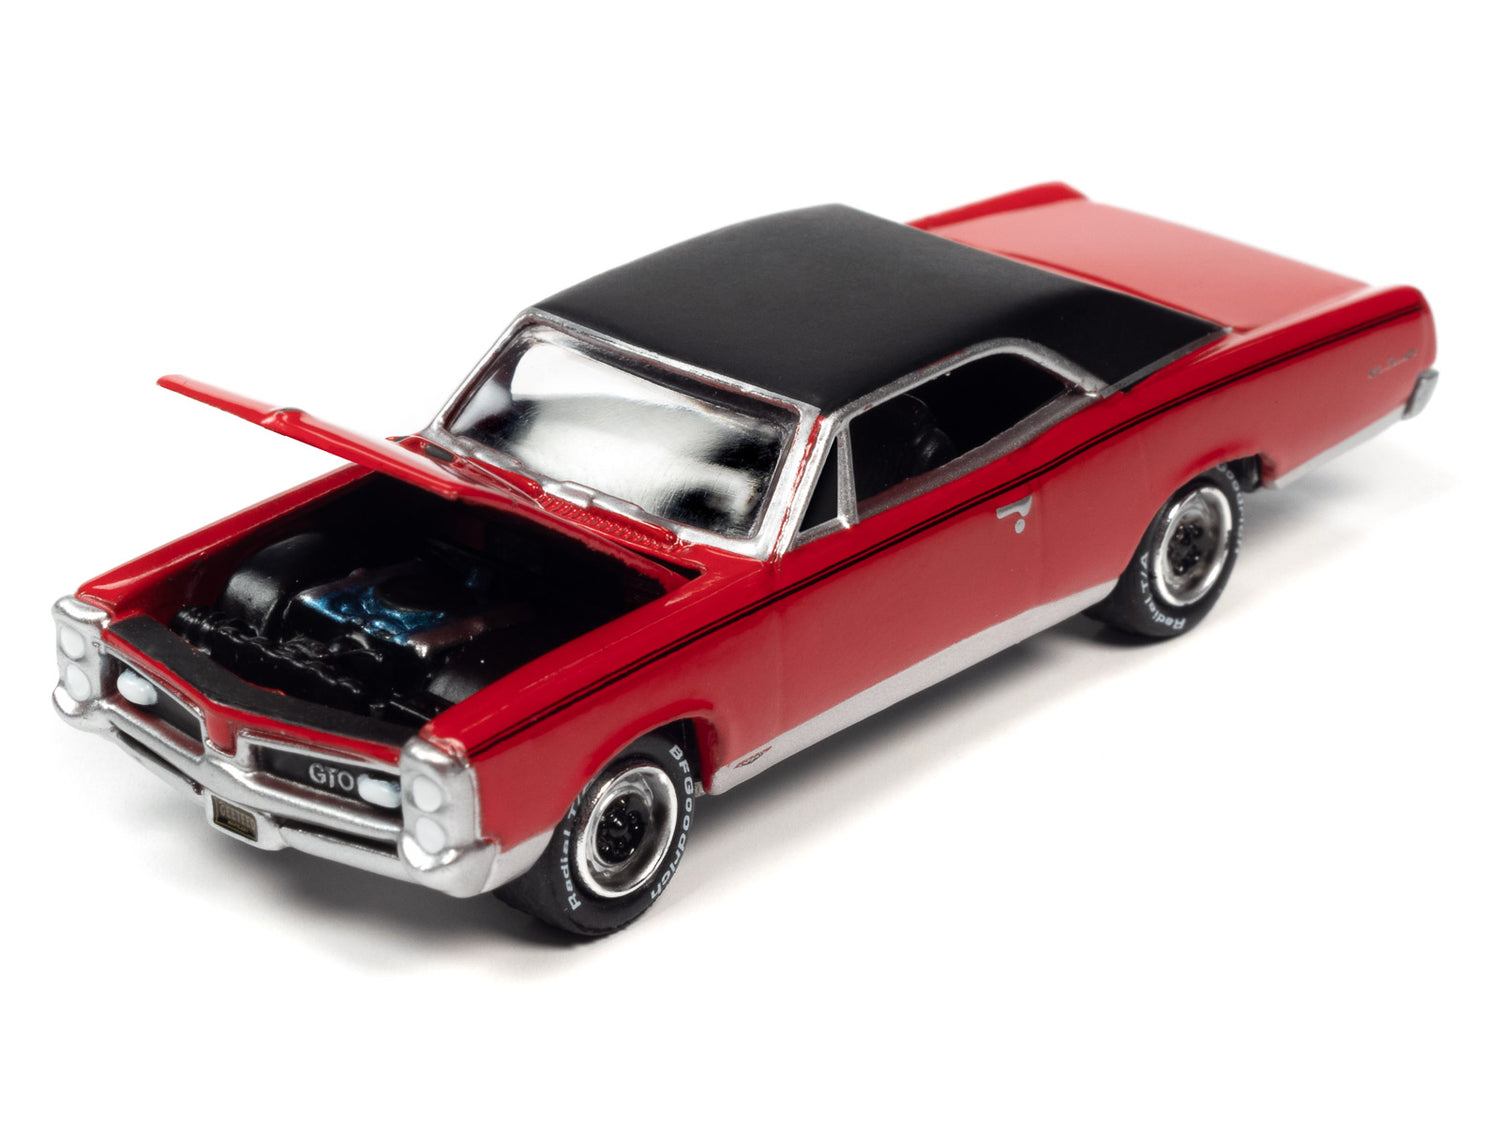 Johnny Lightning 1967 Pontiac GTO (Cardinal Red w/Flat Black Roof) with Collector Tin 1:64 Diecast